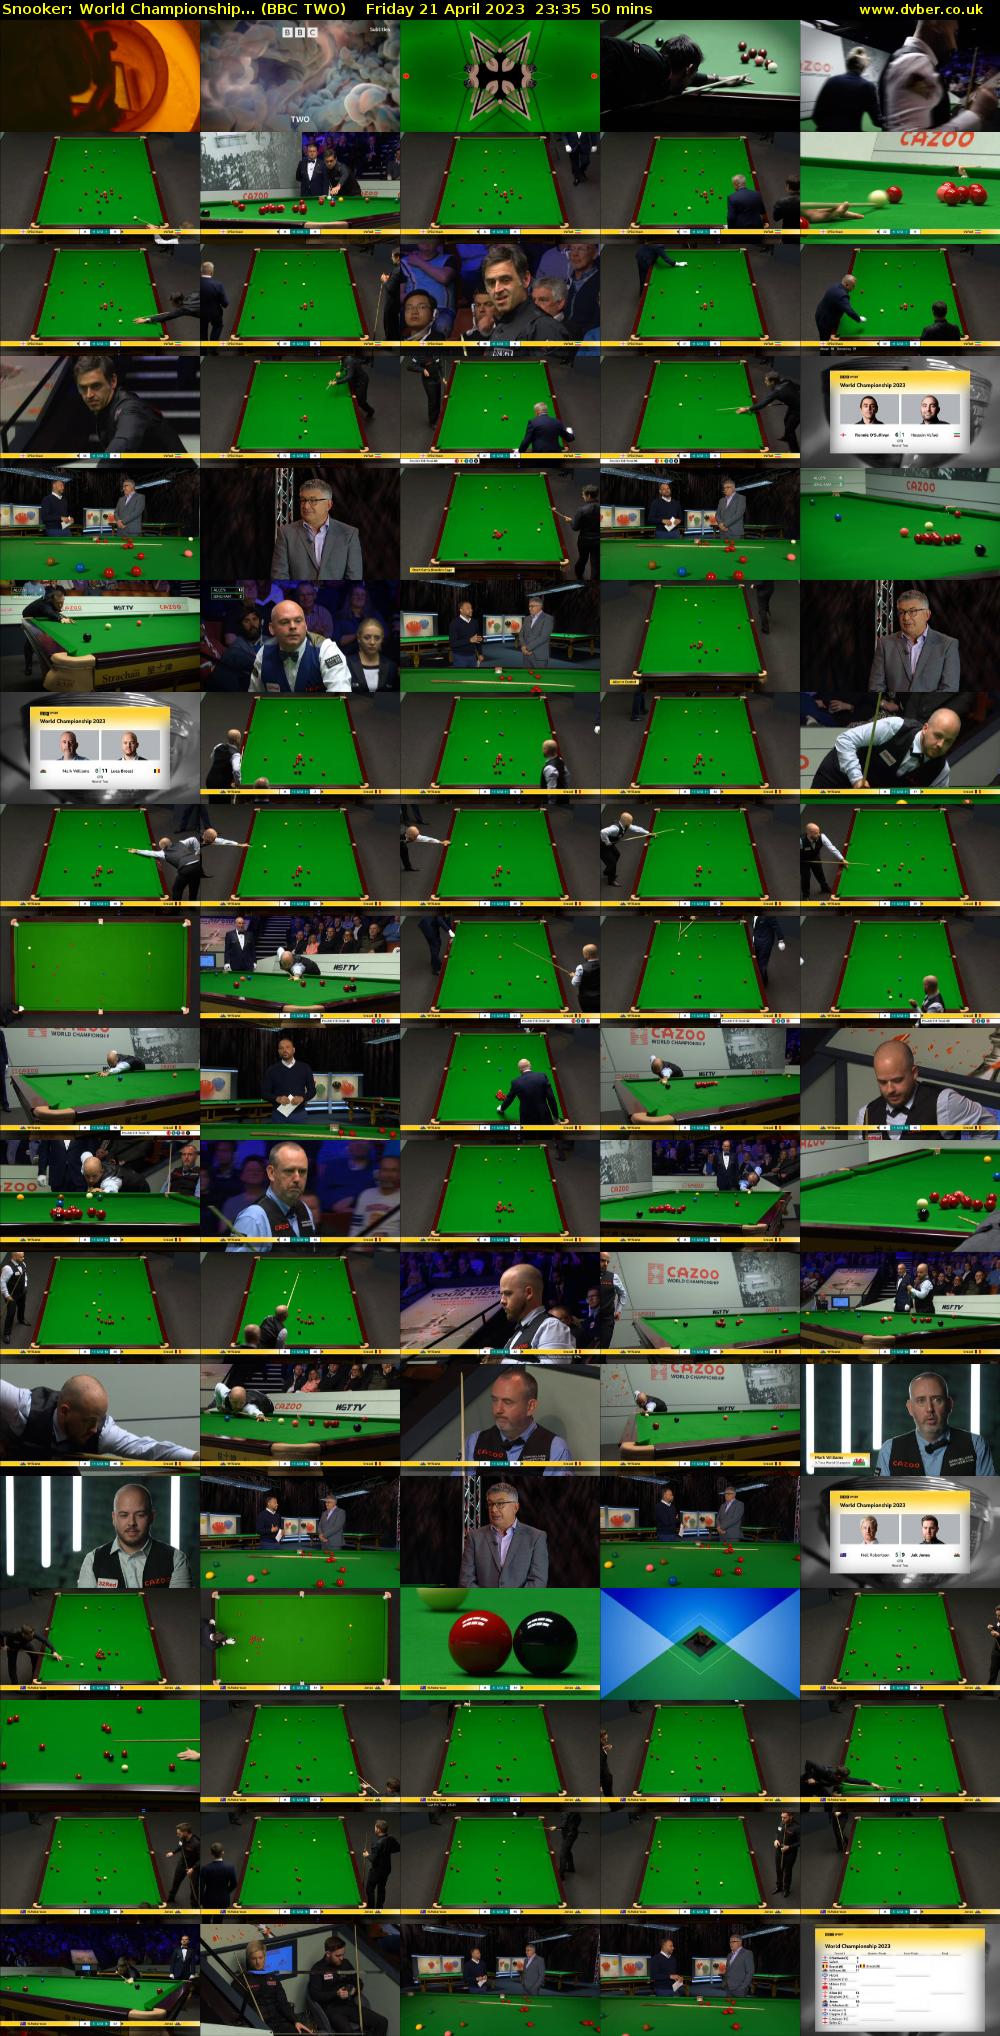 Snooker: World Championship... (BBC TWO) Friday 21 April 2023 23:35 - 00:25